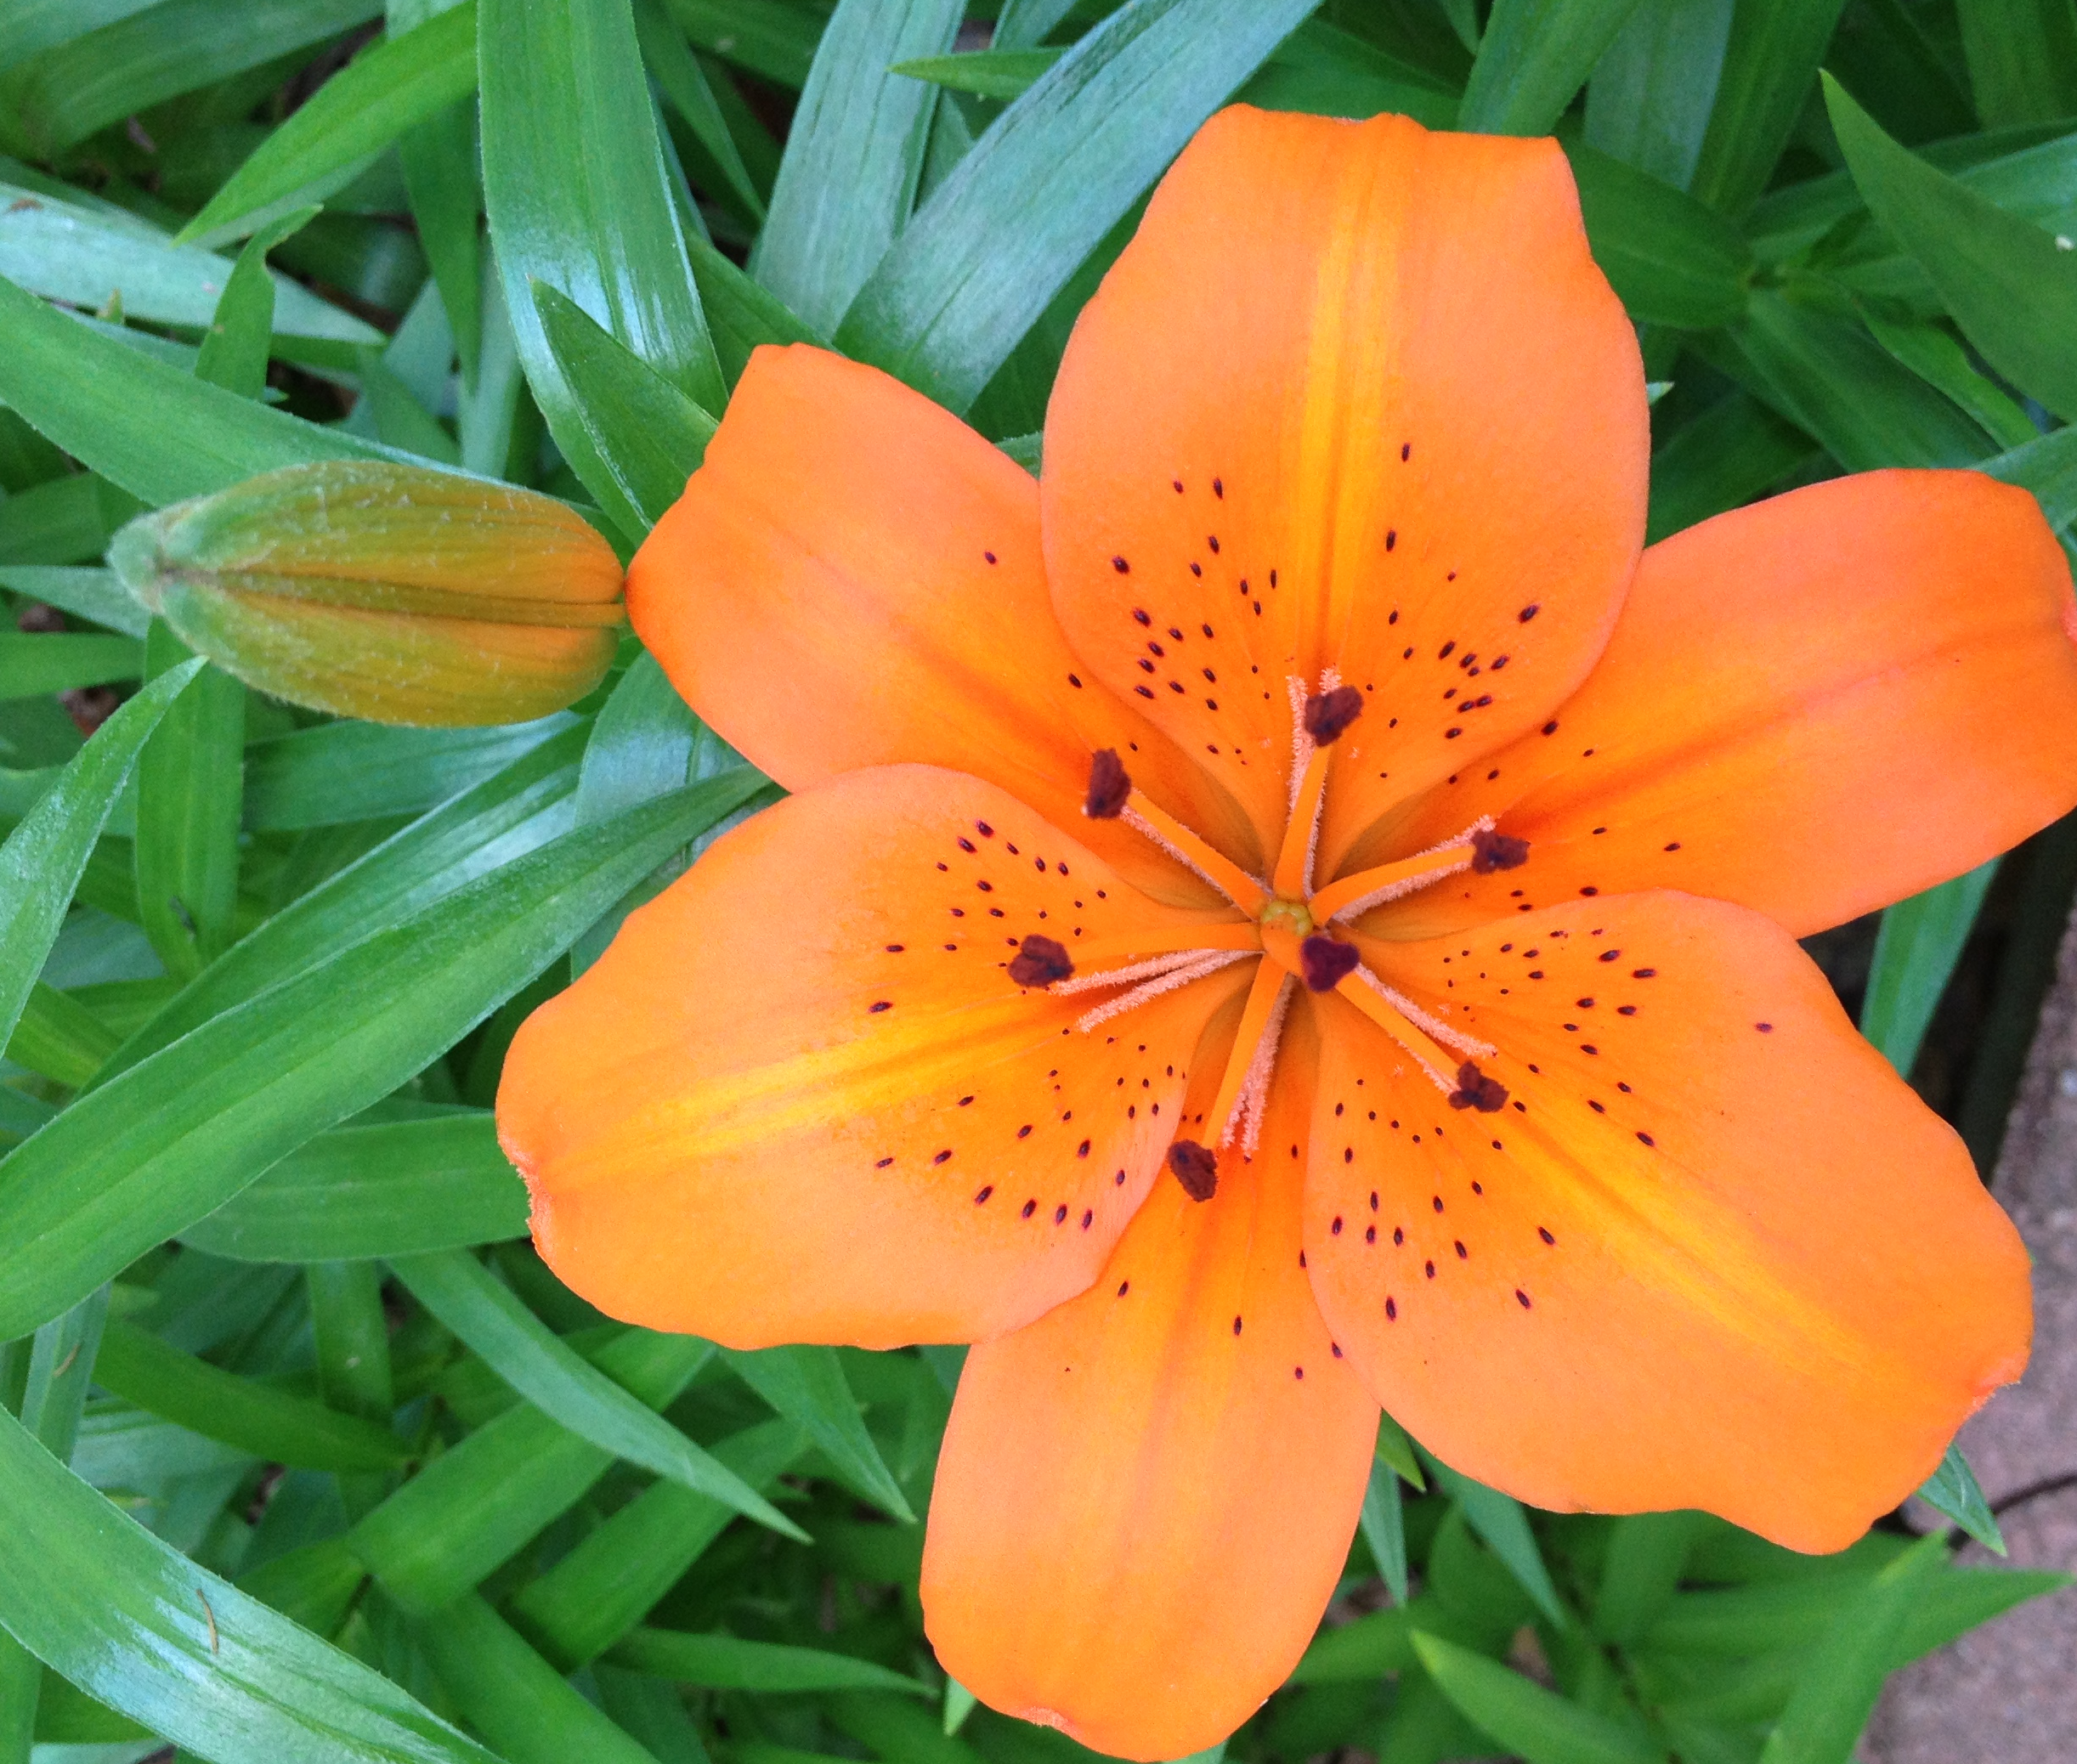 The Tiger Lilies are in Bloom Again | LJ Innes' Photo Blog